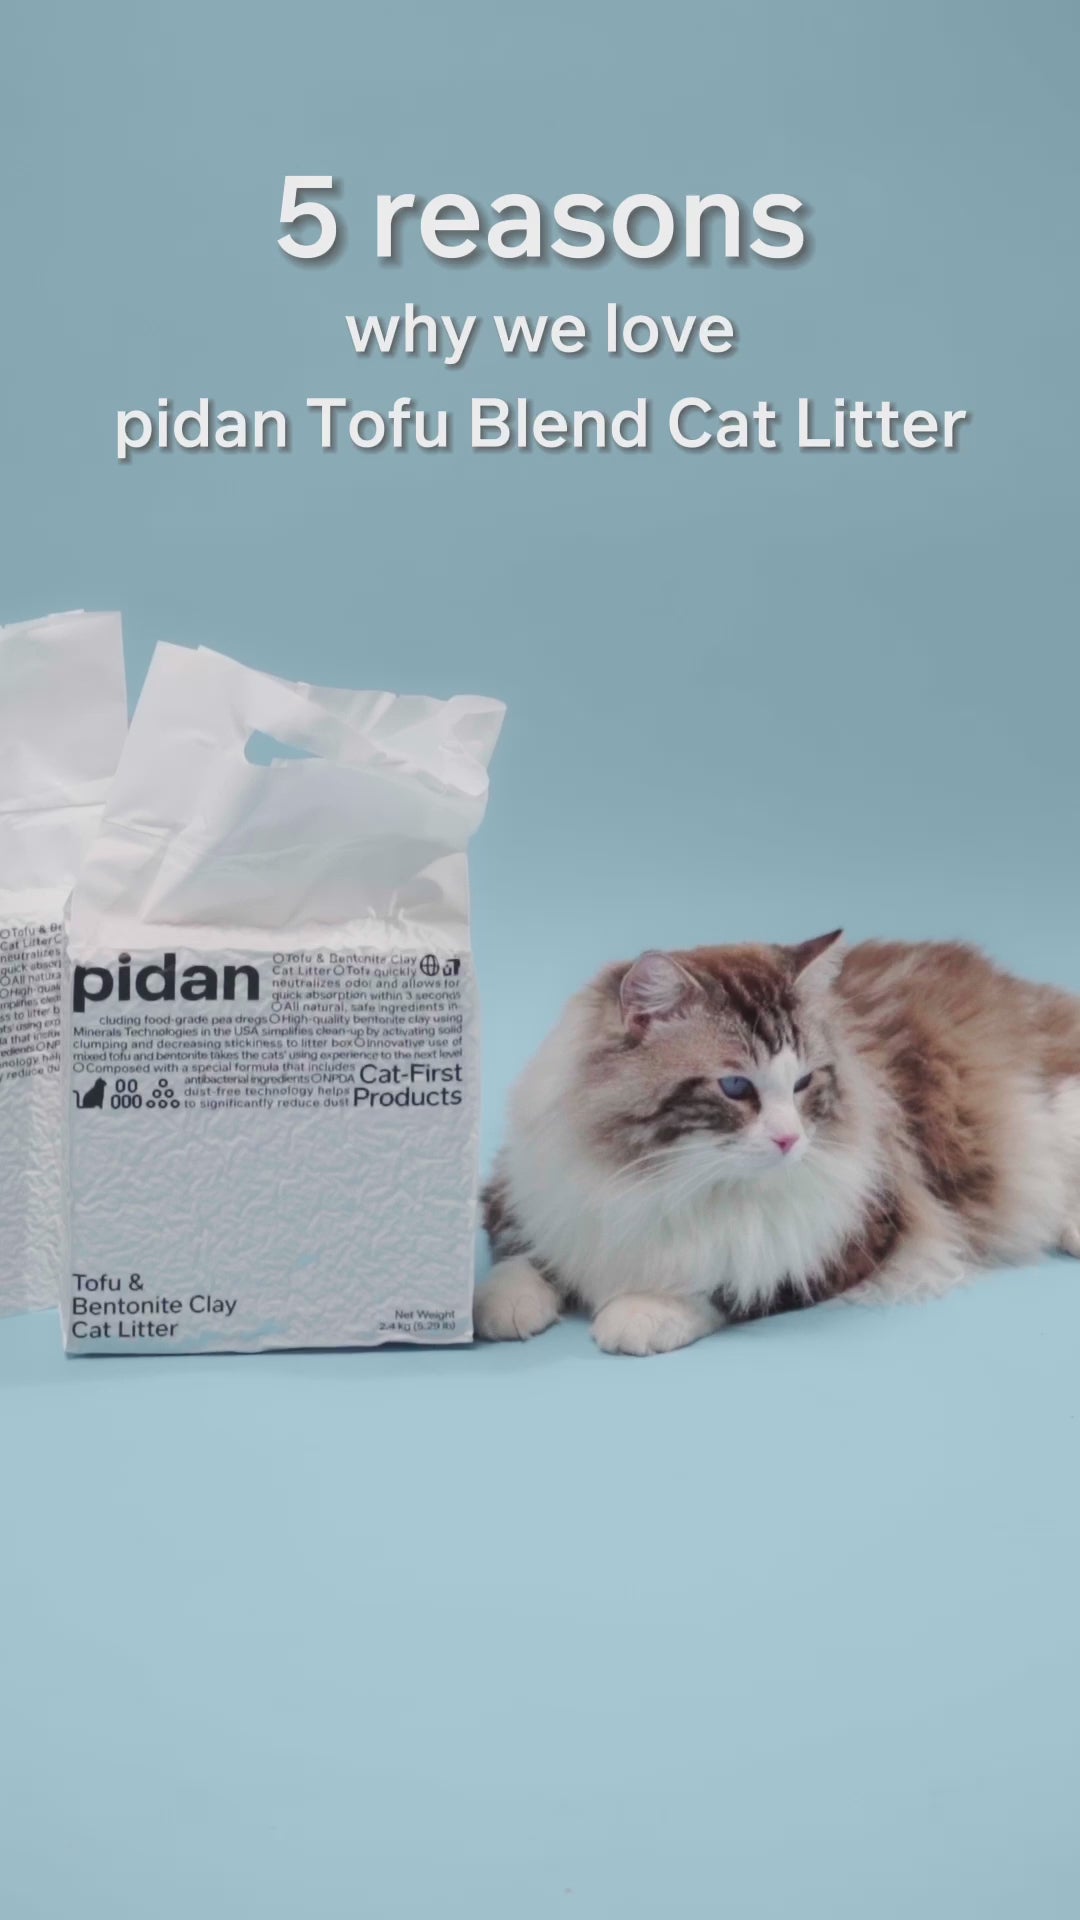 PIDAN Composite Tofu Cat Litter: Tofu & Crushed Bentonite 2.4KG - Ideal for Cats with Sensitive Urinary Systems